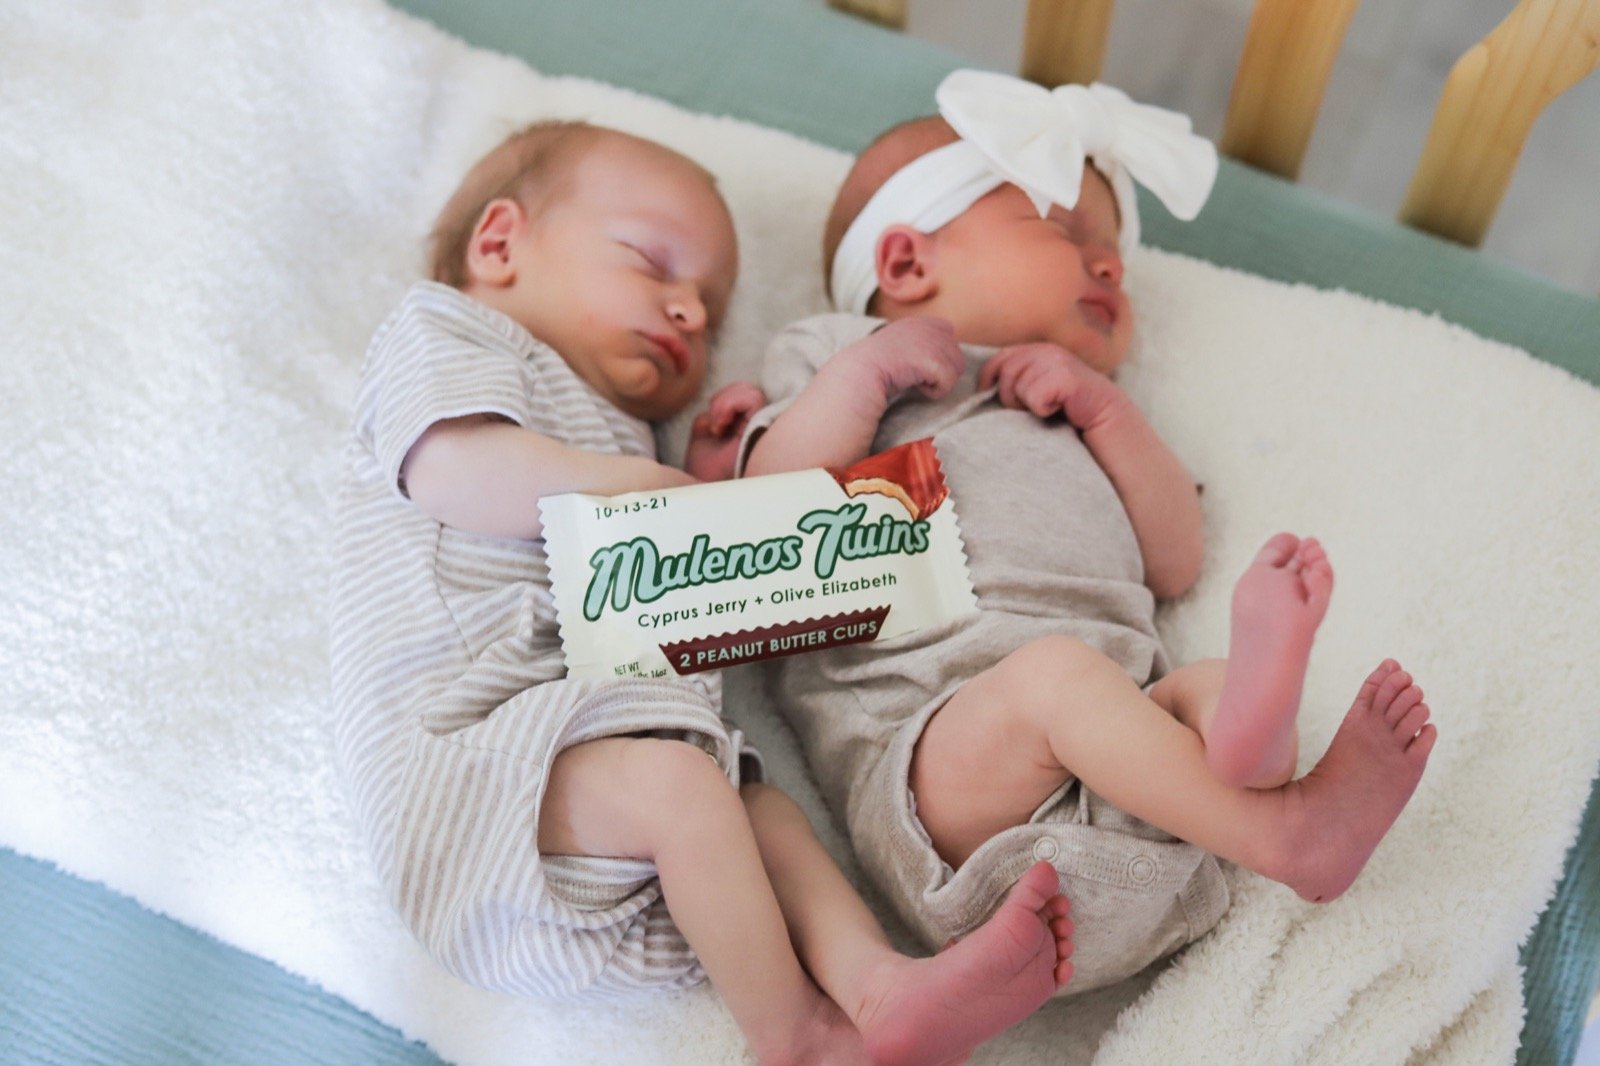 introducing the mulenos twins, lments of style, di-di twins, twin pregnancy, boy-girl twins, baby name inspiration, baby name ideas, unique baby names, cyprus, olive, custom candy bar wrapper, baby birth announcment personalized candy wrapper